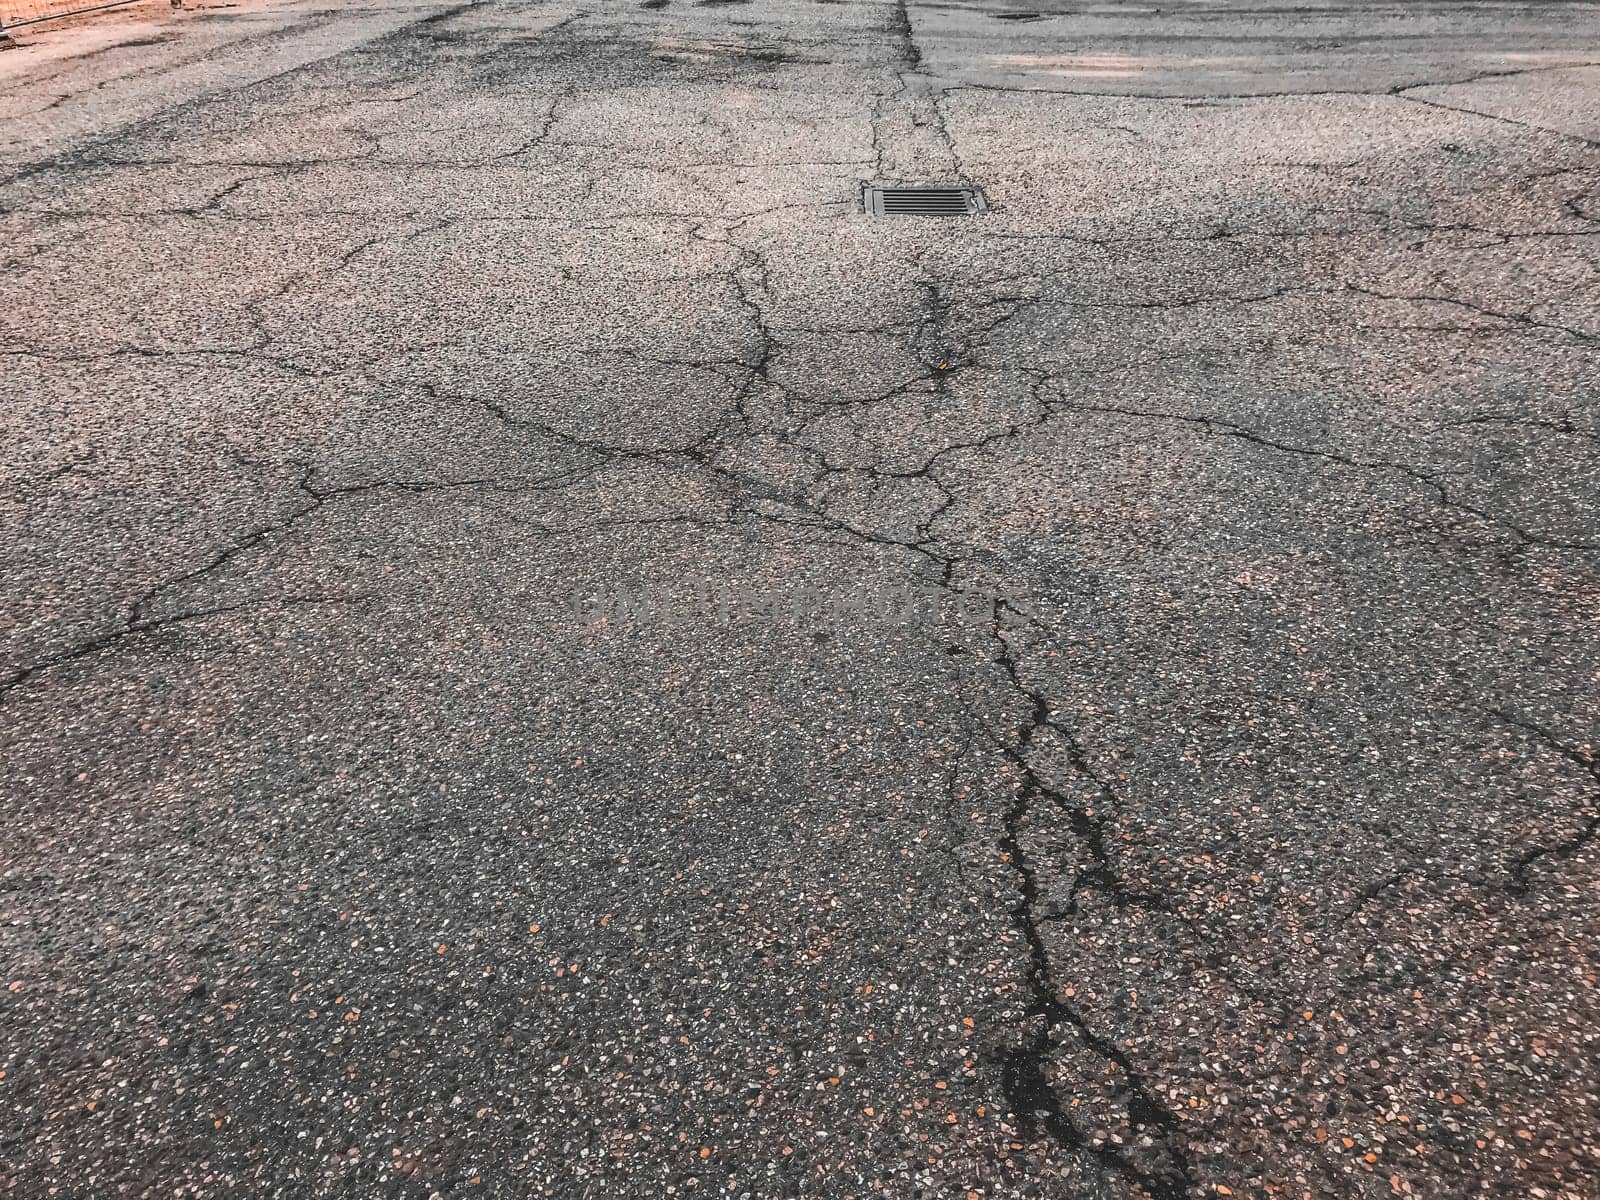 A cracked and broken road with a hole in the middle. The road is in a state of disrepair and is not safe for driving